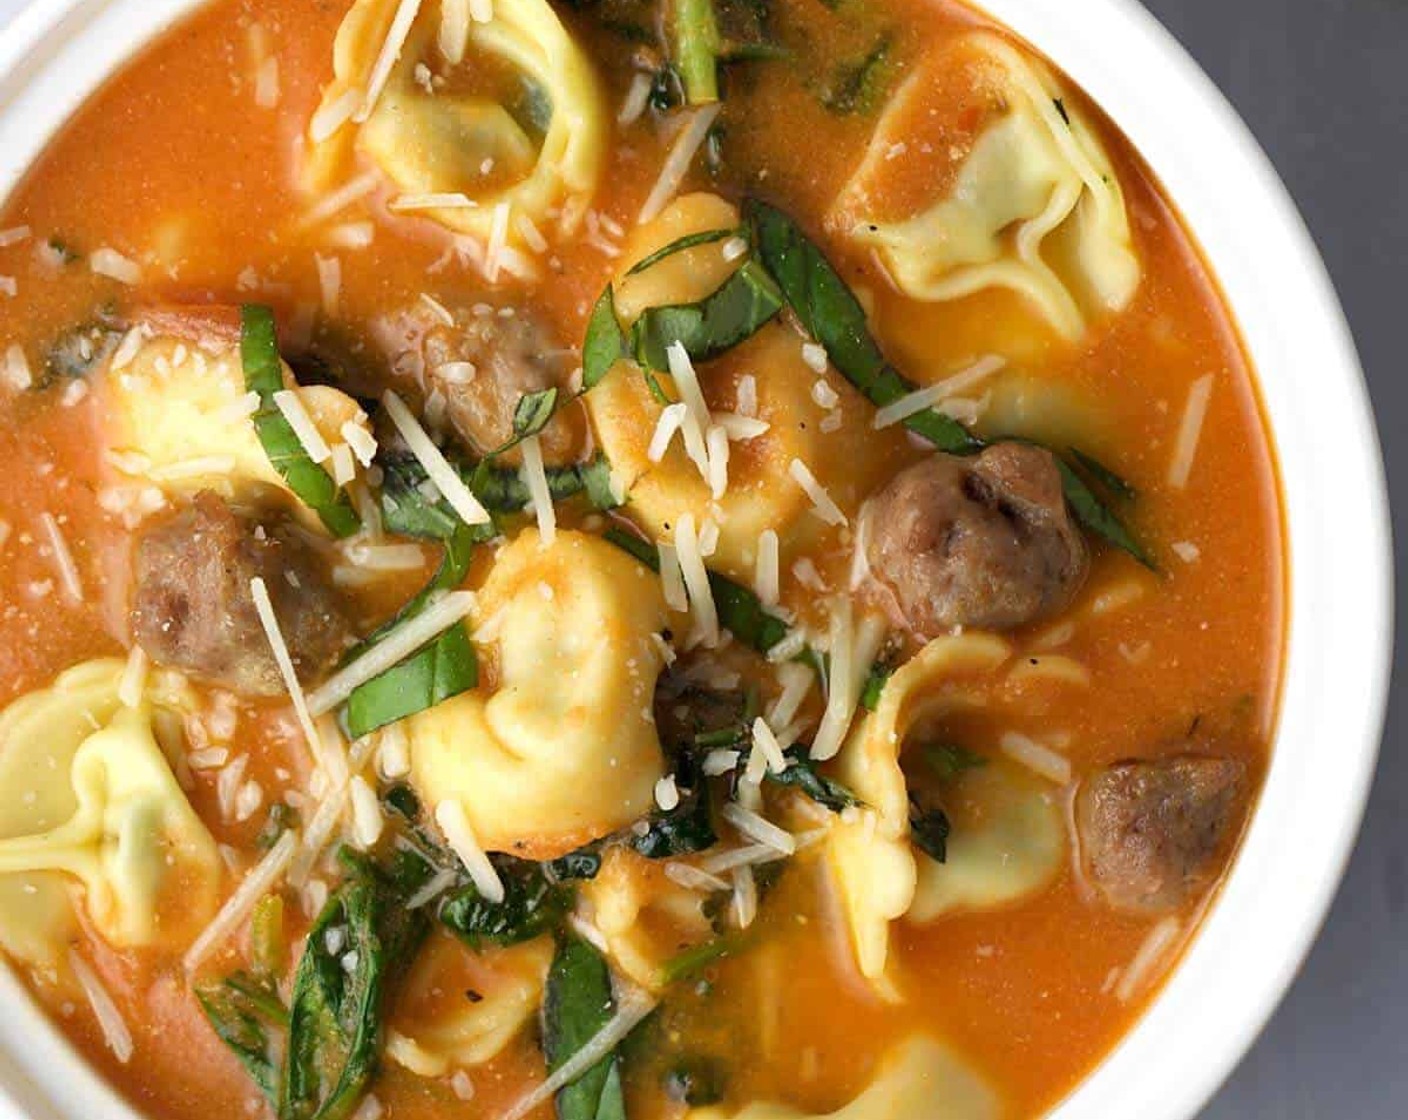 Tuscan Tomato Tortellini Soup with Italian Sausage and Greens